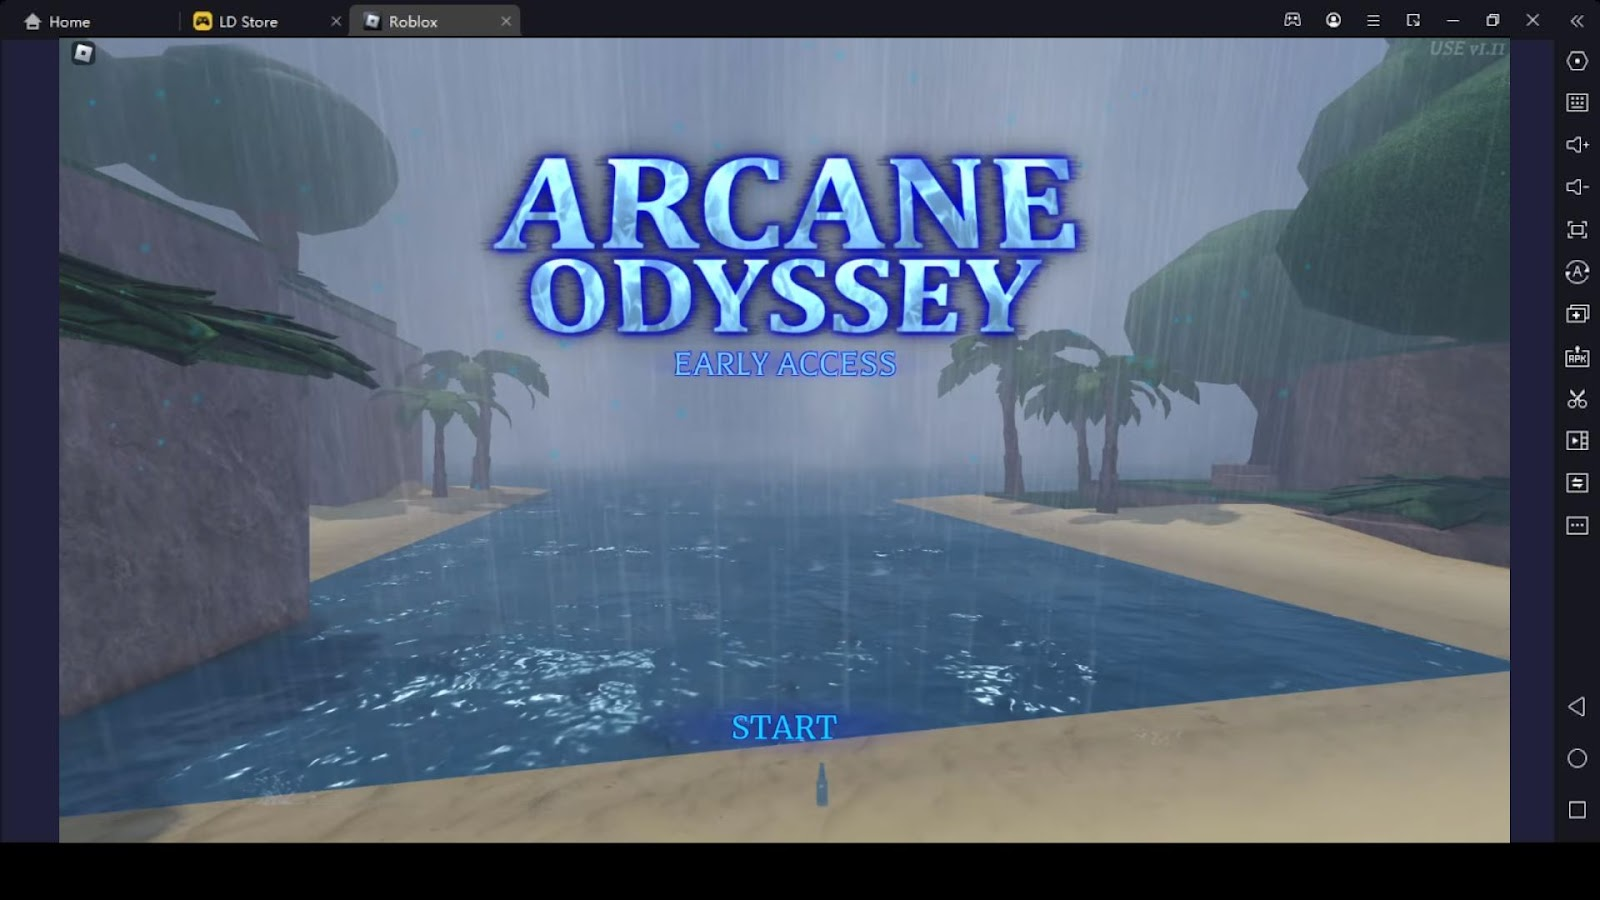 Roblox Arcane Odyssey Codes for Free Items, Resources, and Many